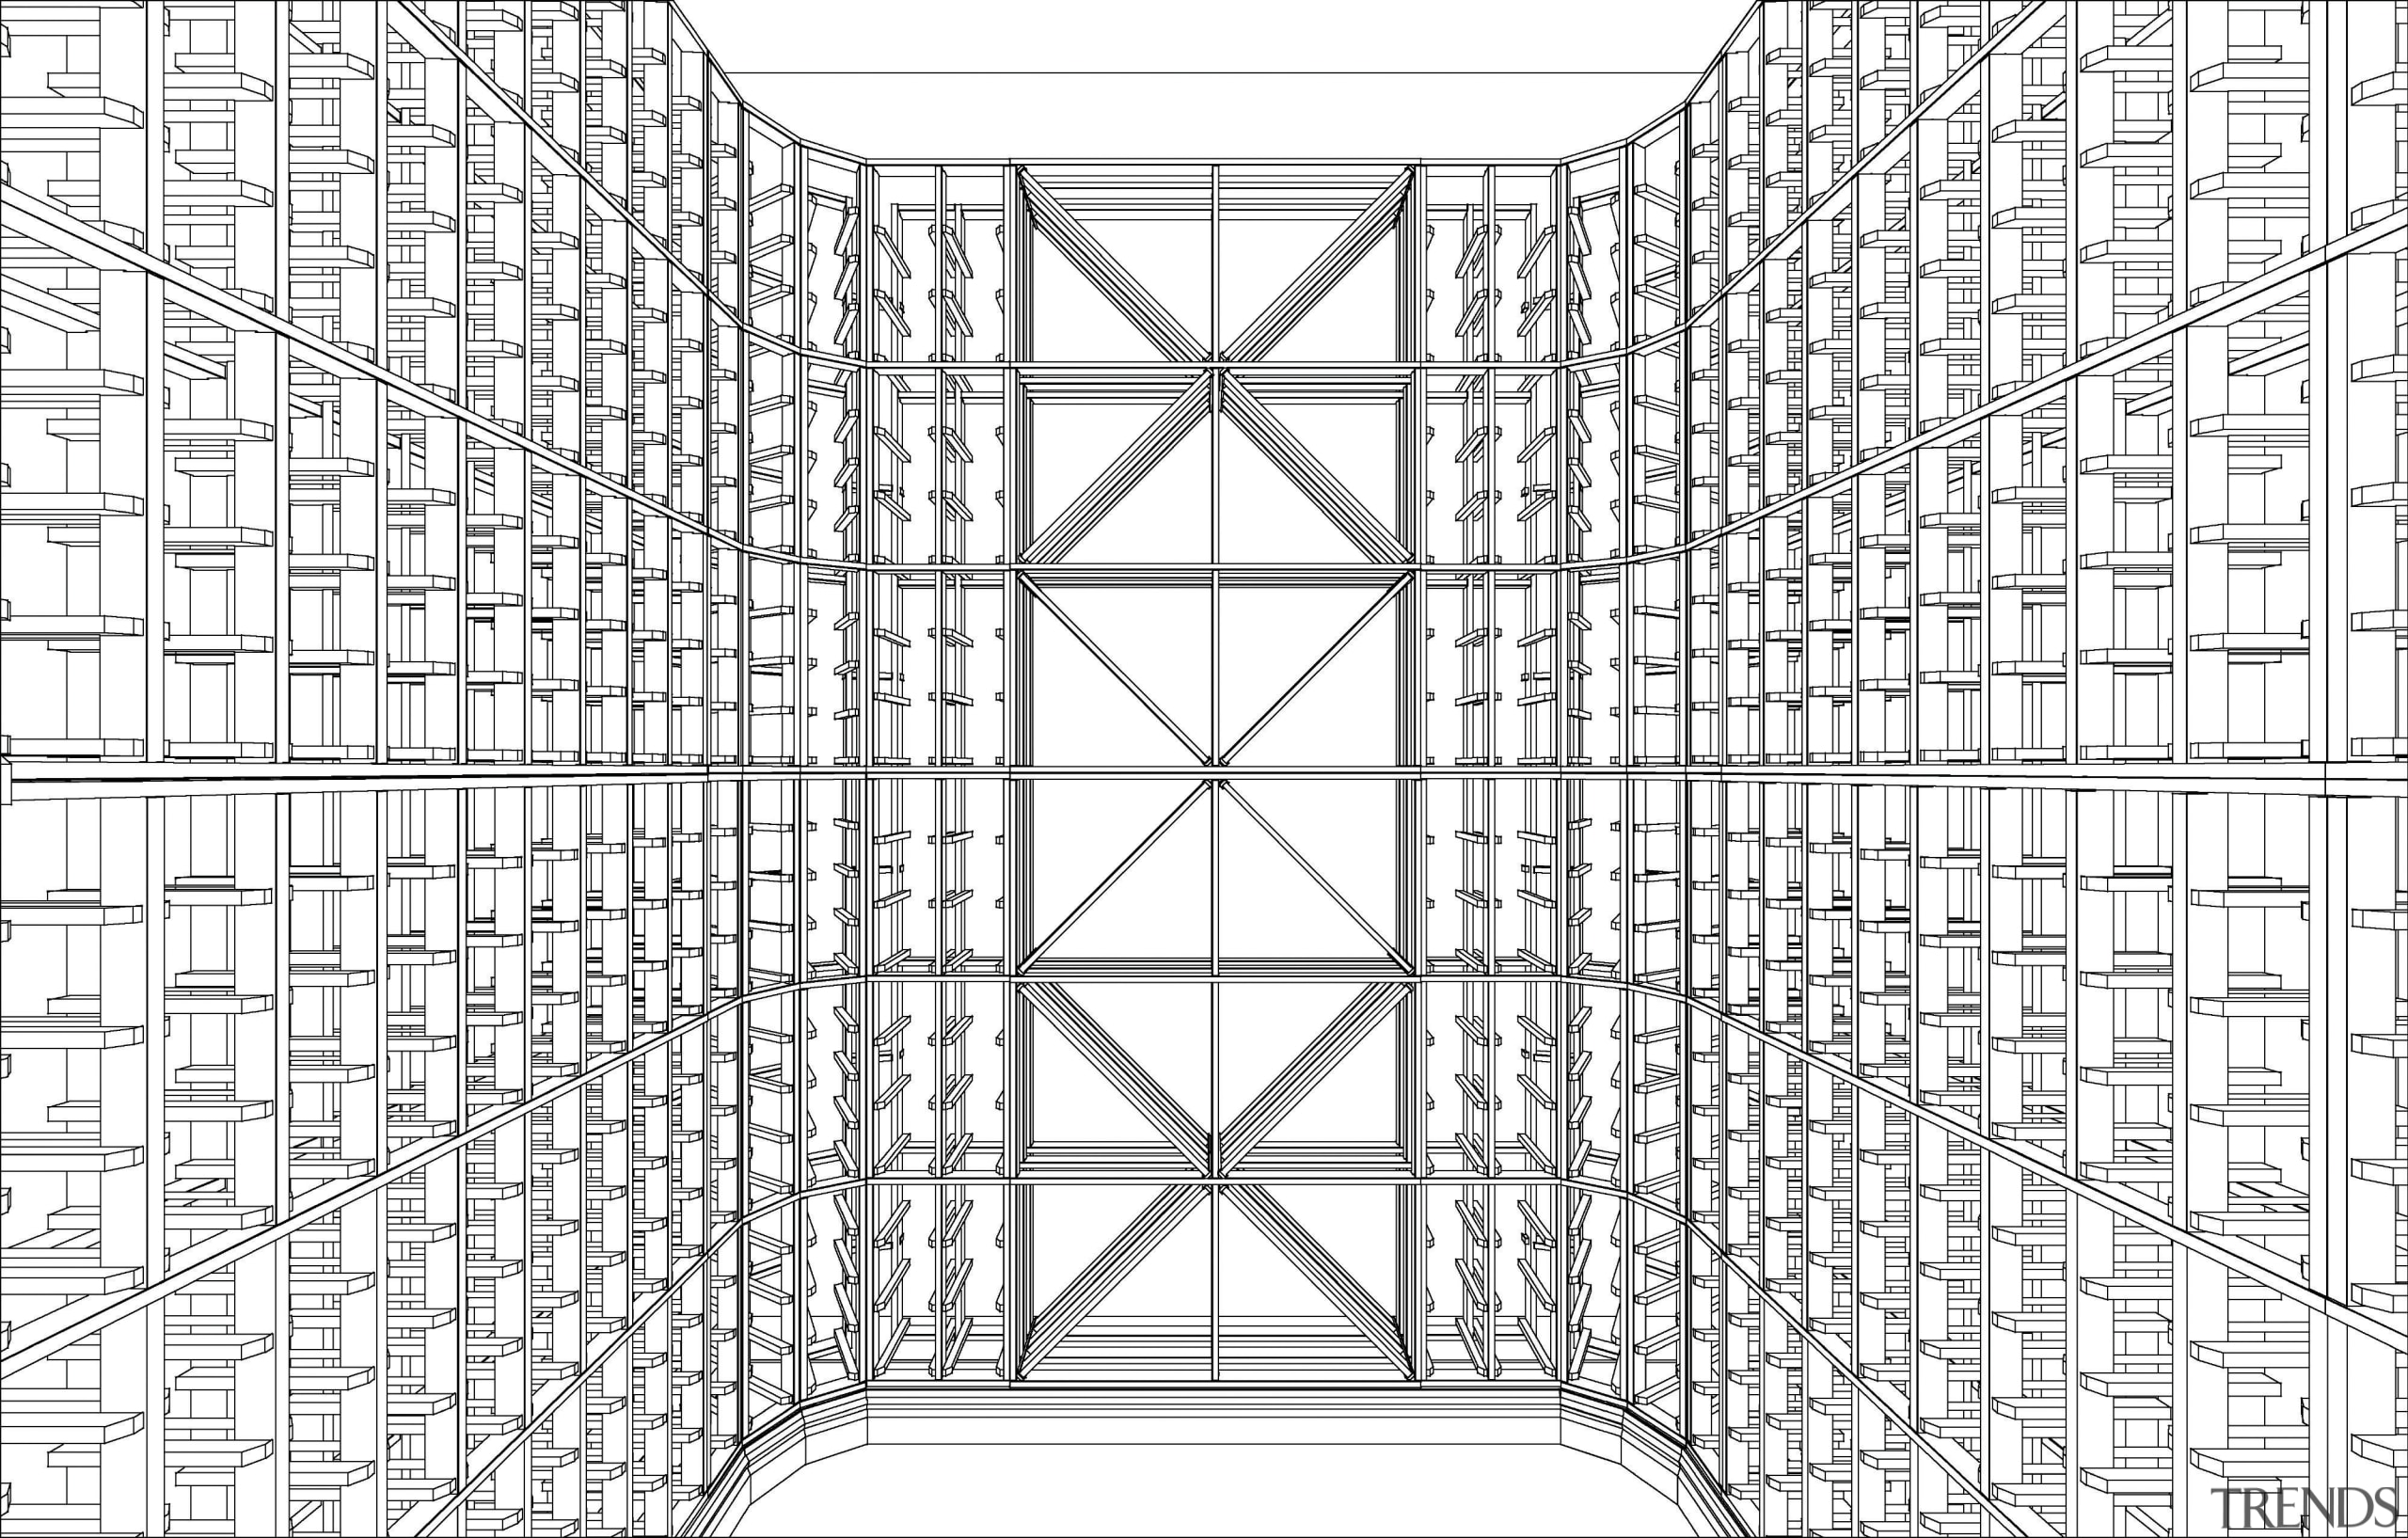 A view of a wine cellar by Baywick's angle, architecture, area, black and white, design, drawing, line, line art, monochrome, pattern, product design, structure, symmetry, white